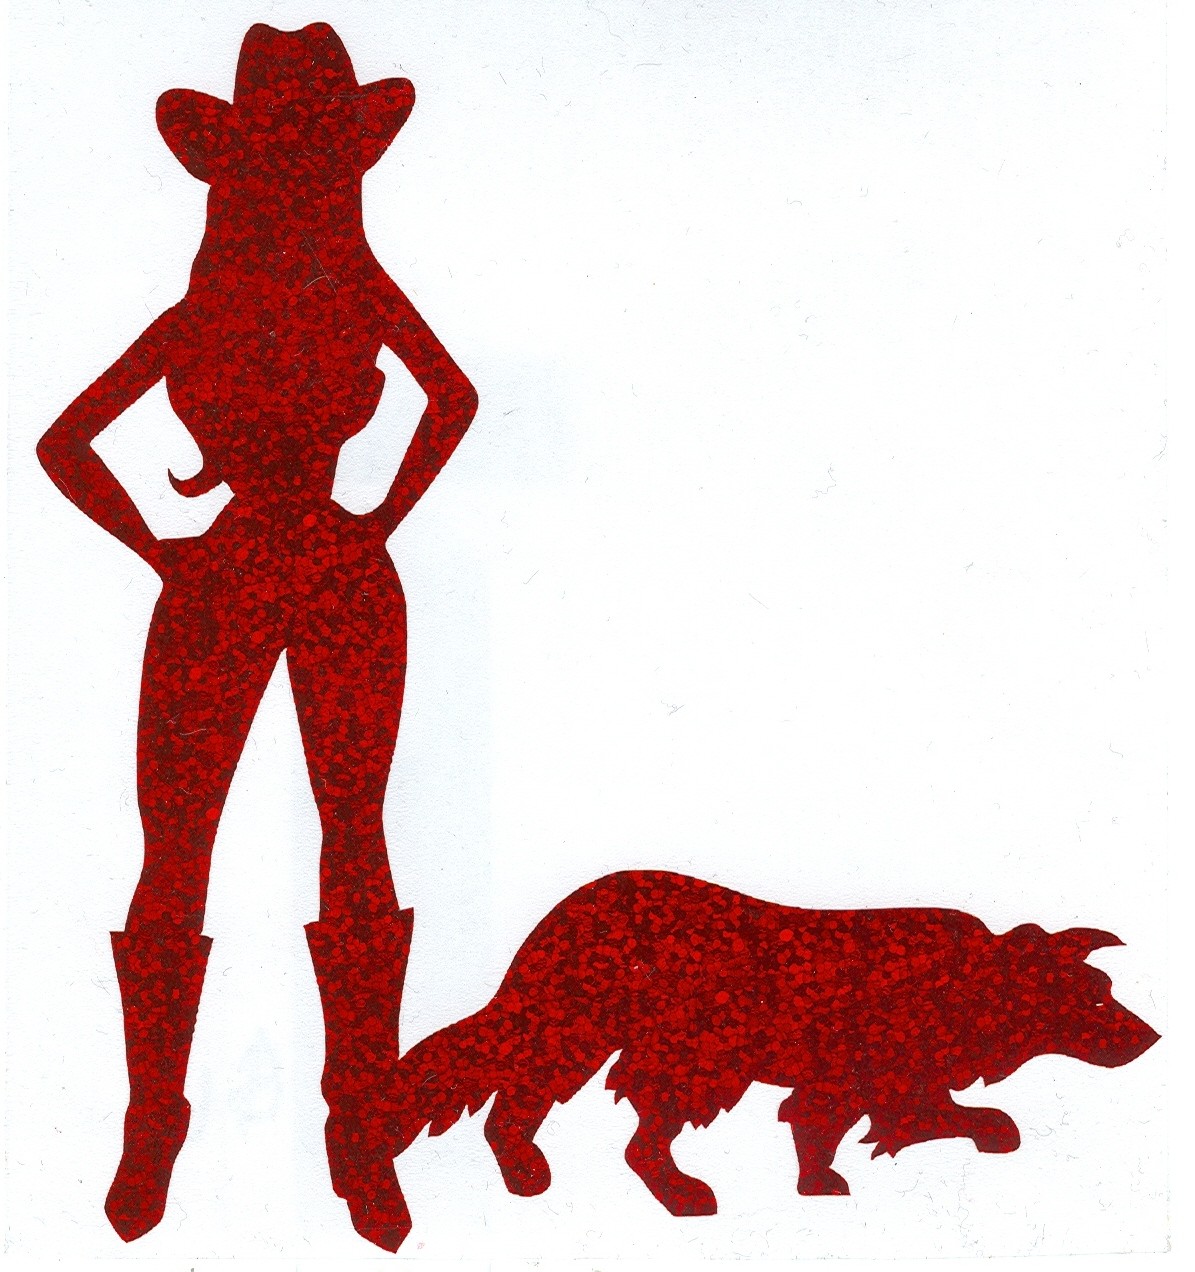 Border Collie and Cowgirl Pin Up Silhouette Red by dangersjones